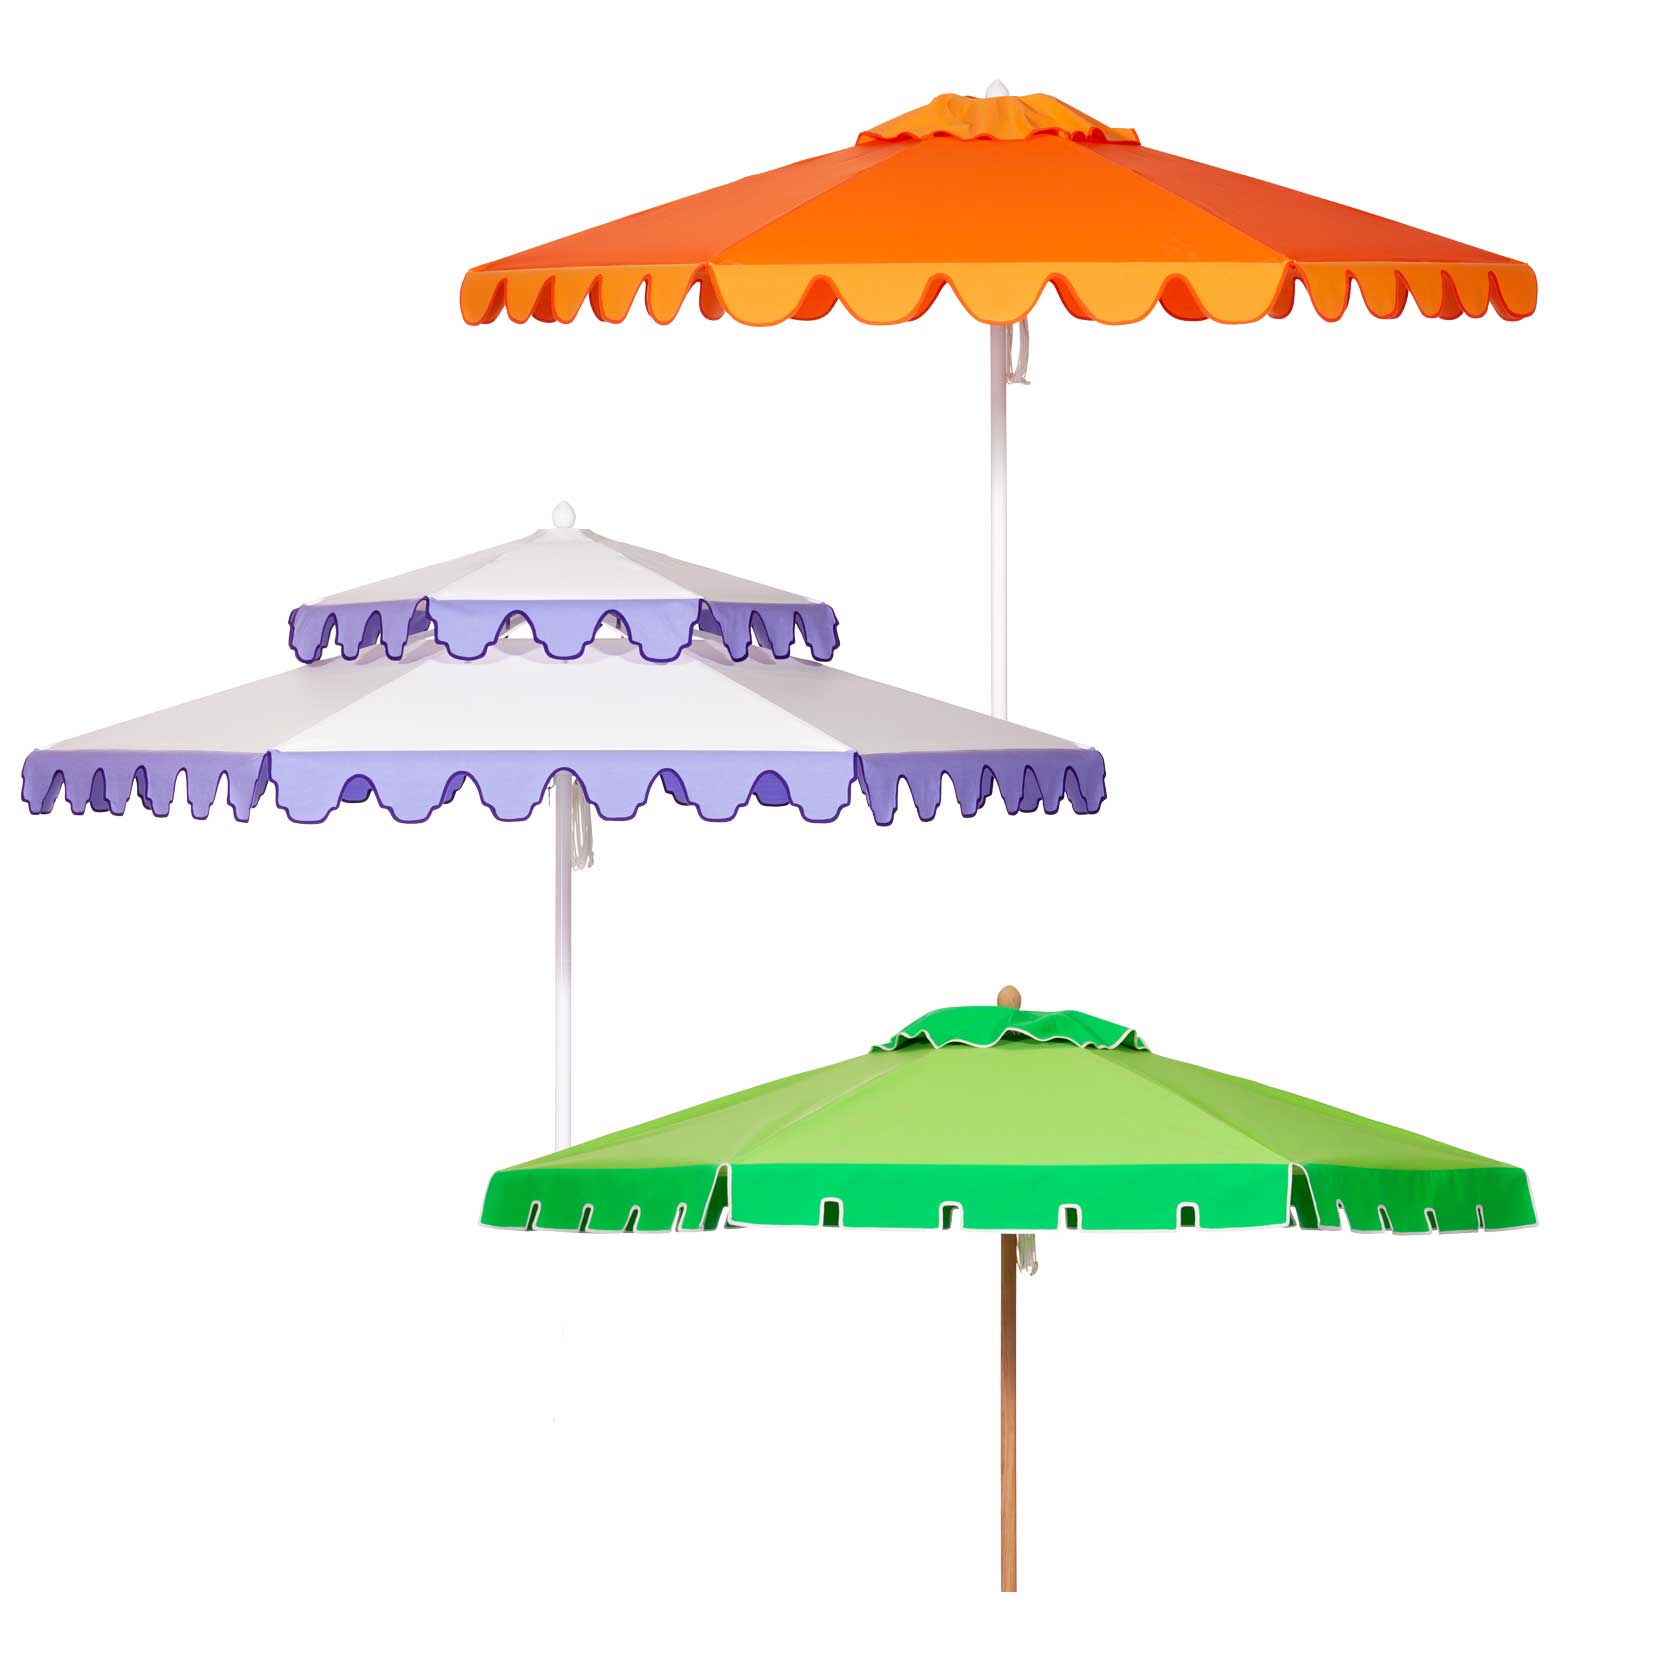 Glace Collection Umbrellas Image